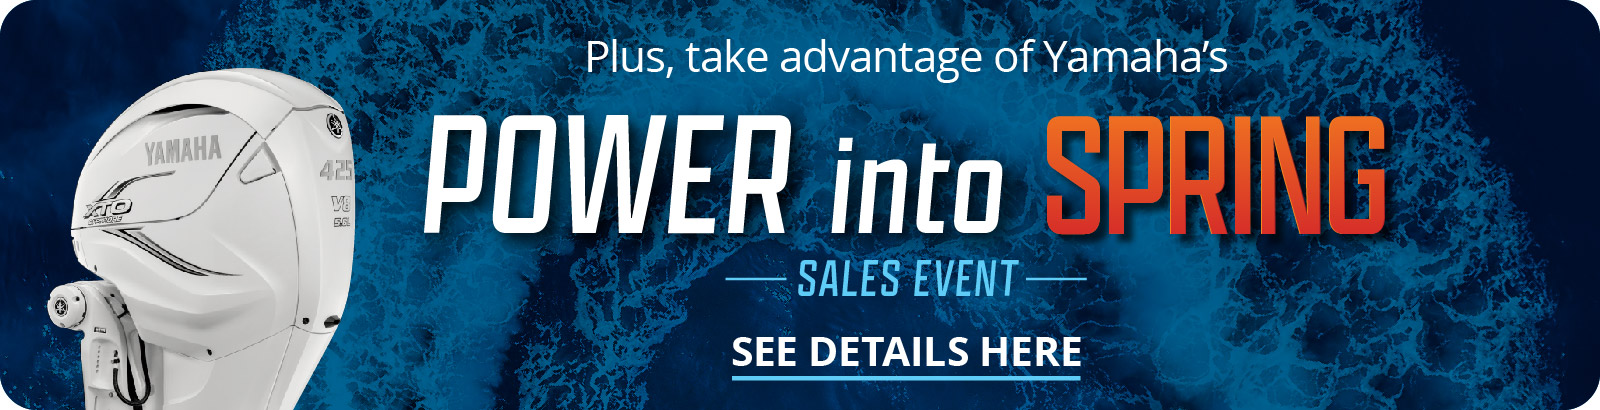 Graphical button showing a Yamaha engine and the words, "Plus, take advantage of Yamaha's Power into Spring Sales Event - See Details Here"